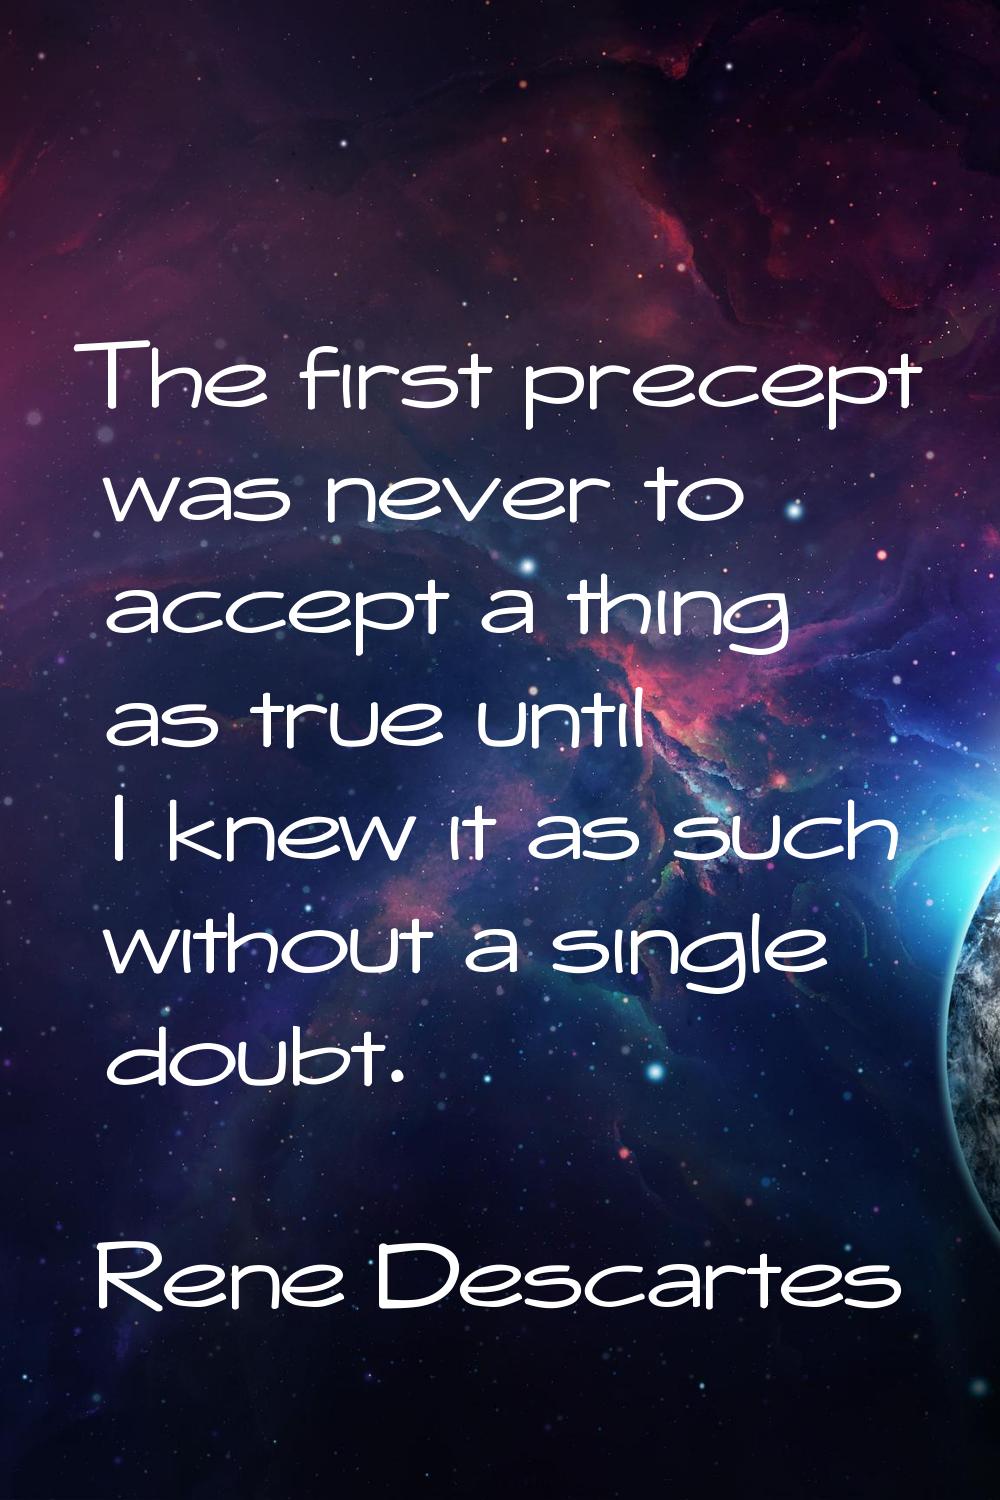 The first precept was never to accept a thing as true until I knew it as such without a single doub